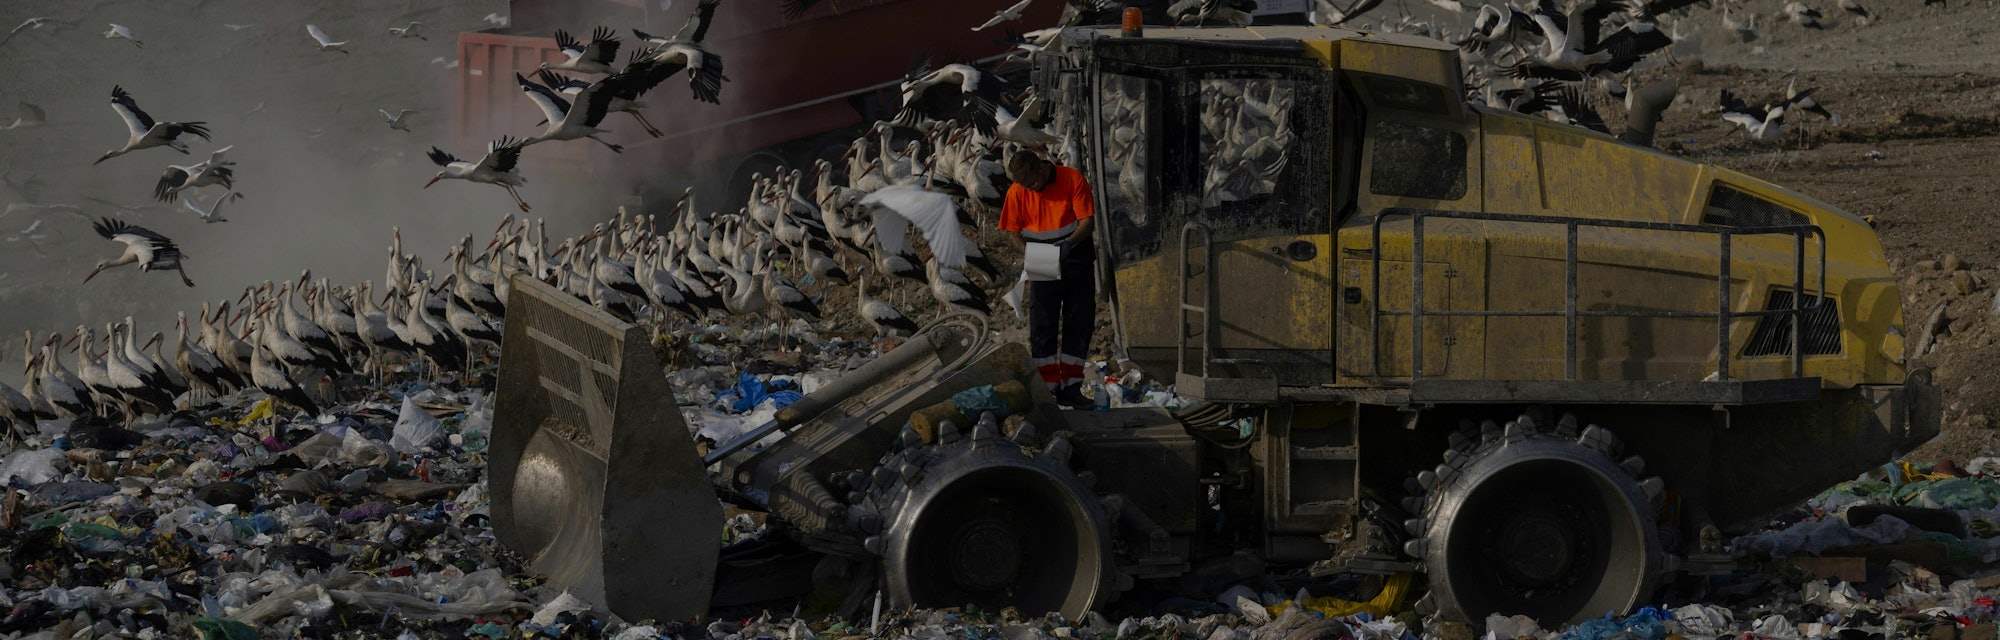 Hundreds of storks surround a truck at a landfill in the outskirts of Pinto near Madrid on July 14, ...